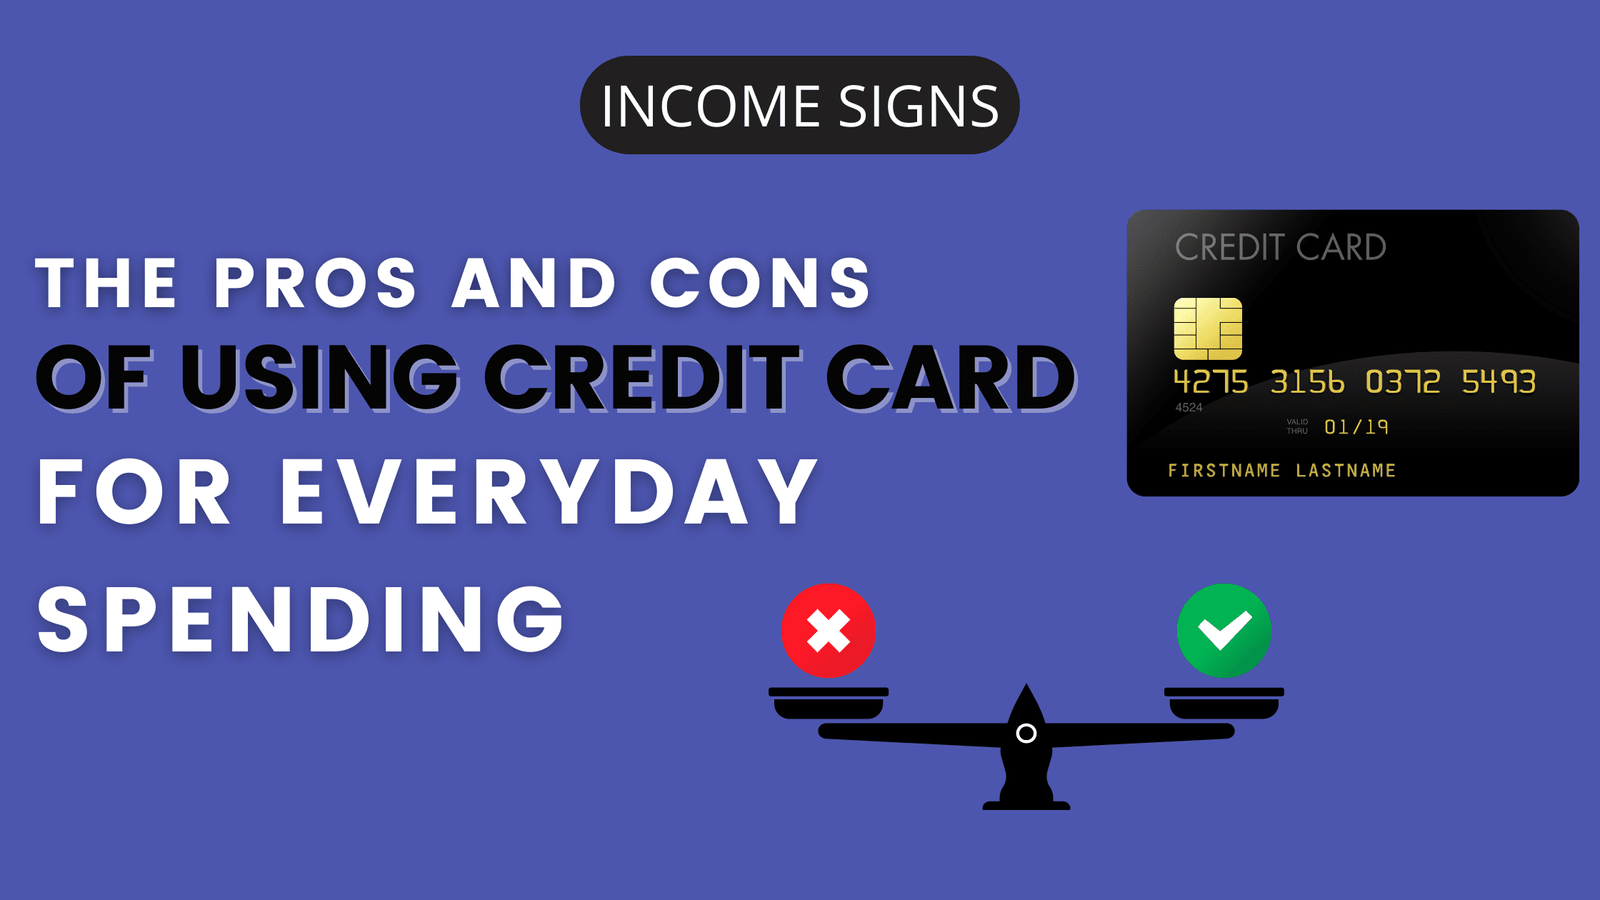 The Pros and Cons of Using a Credit Card for Everyday Spending